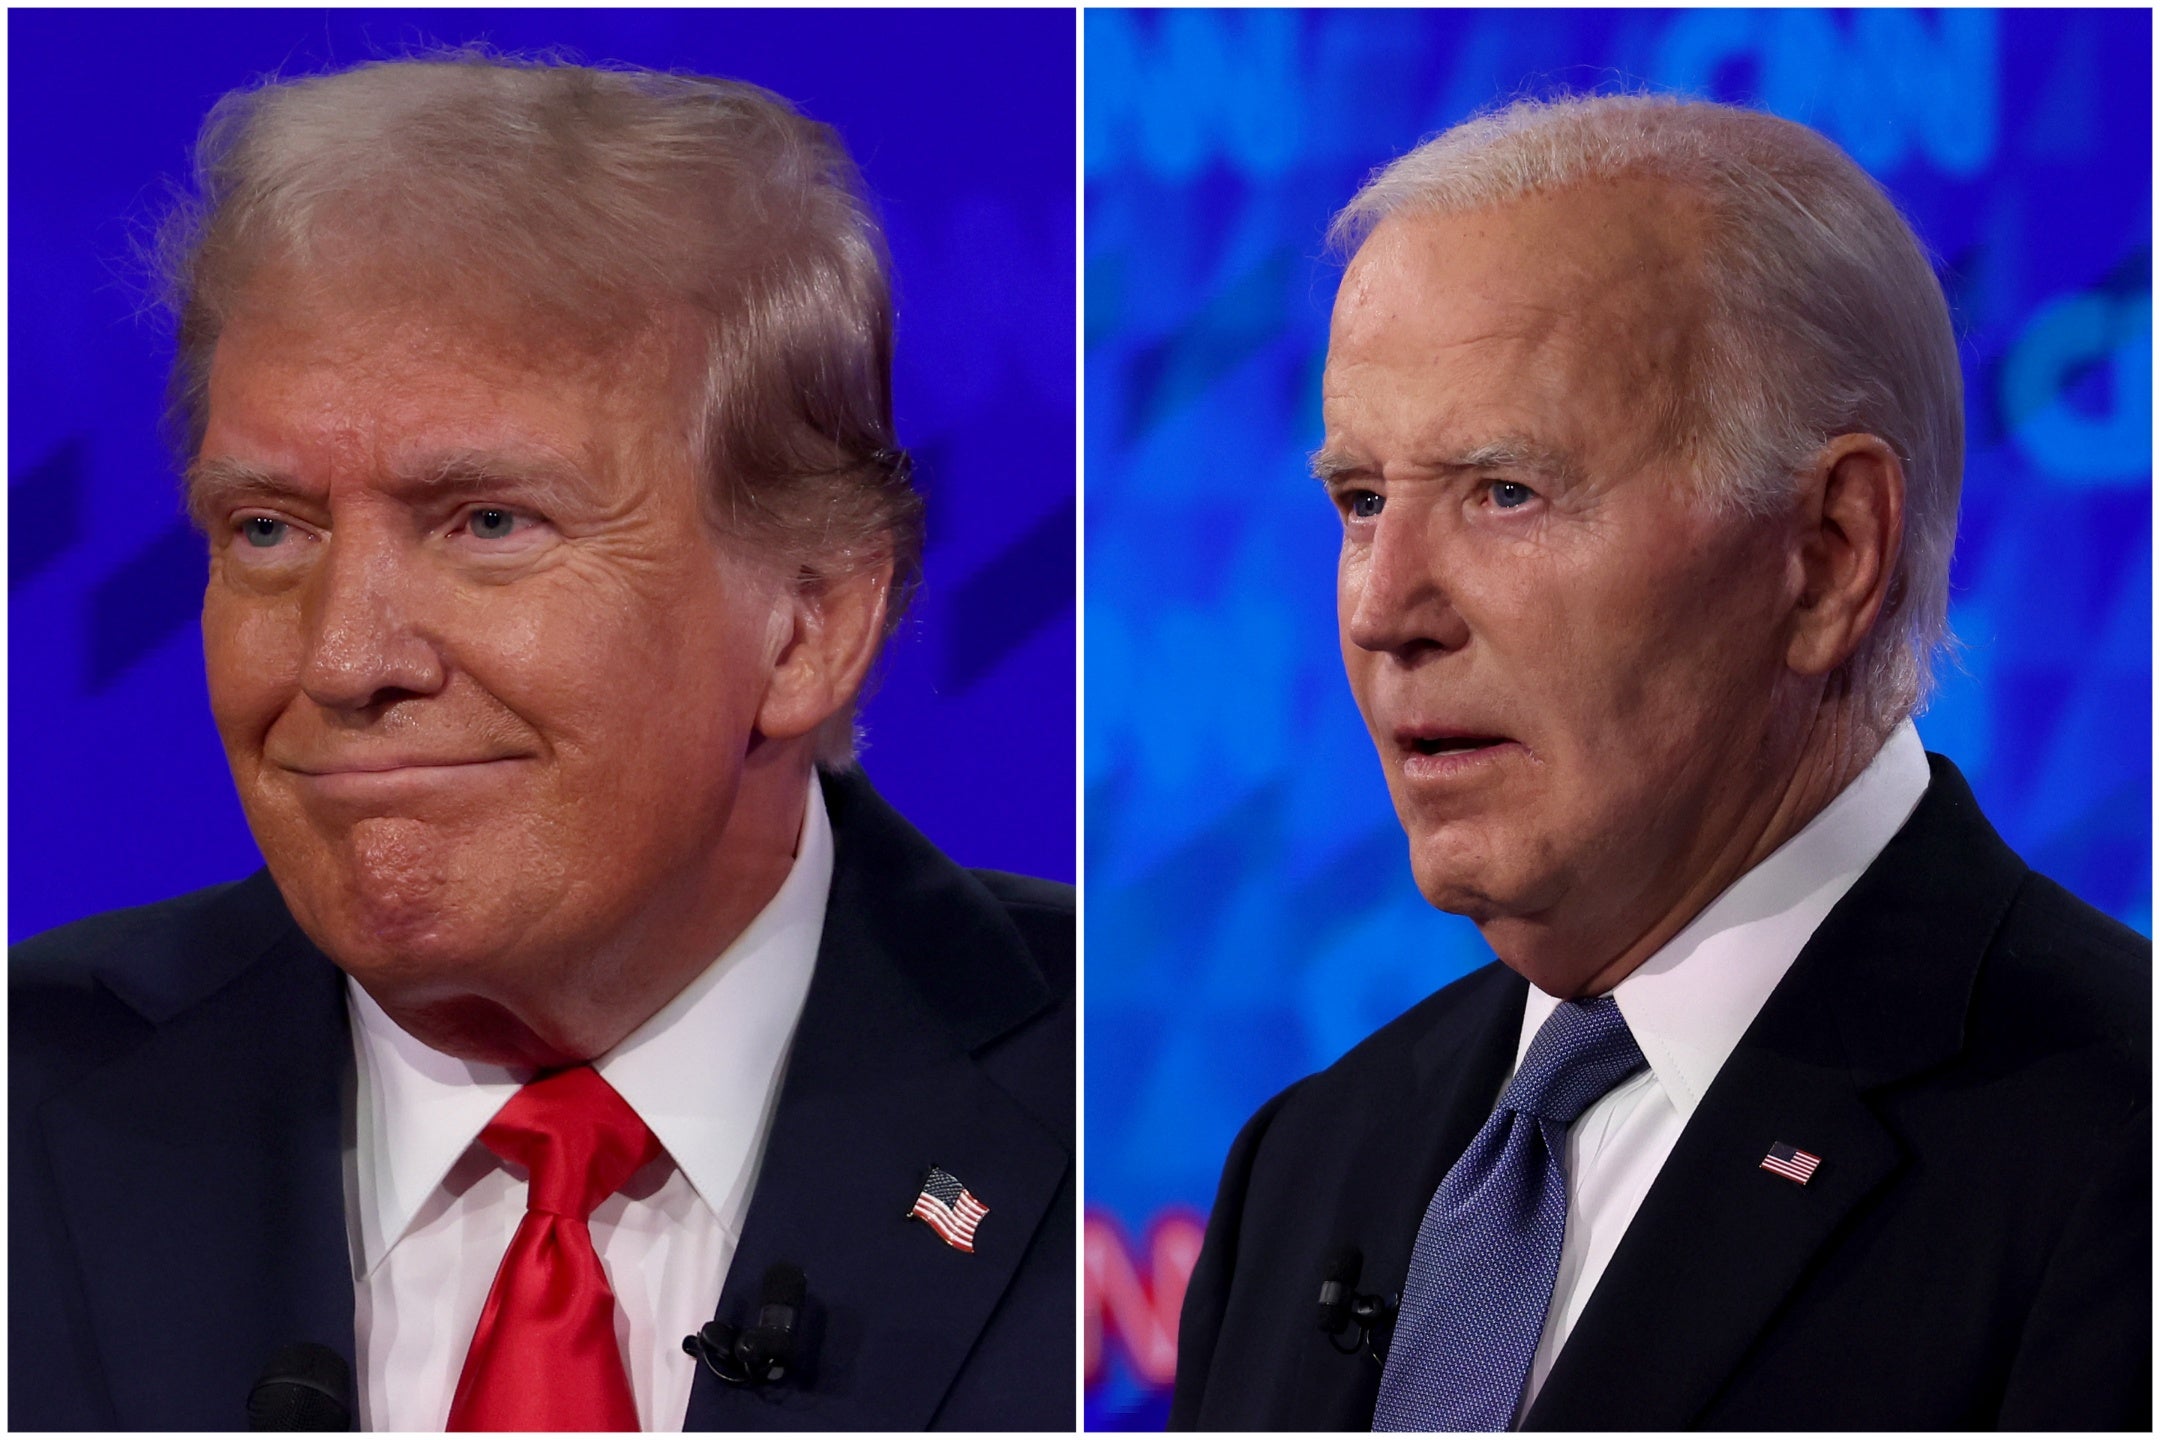 Donald Trump and Joe Biden during the first presidential debate on June 27